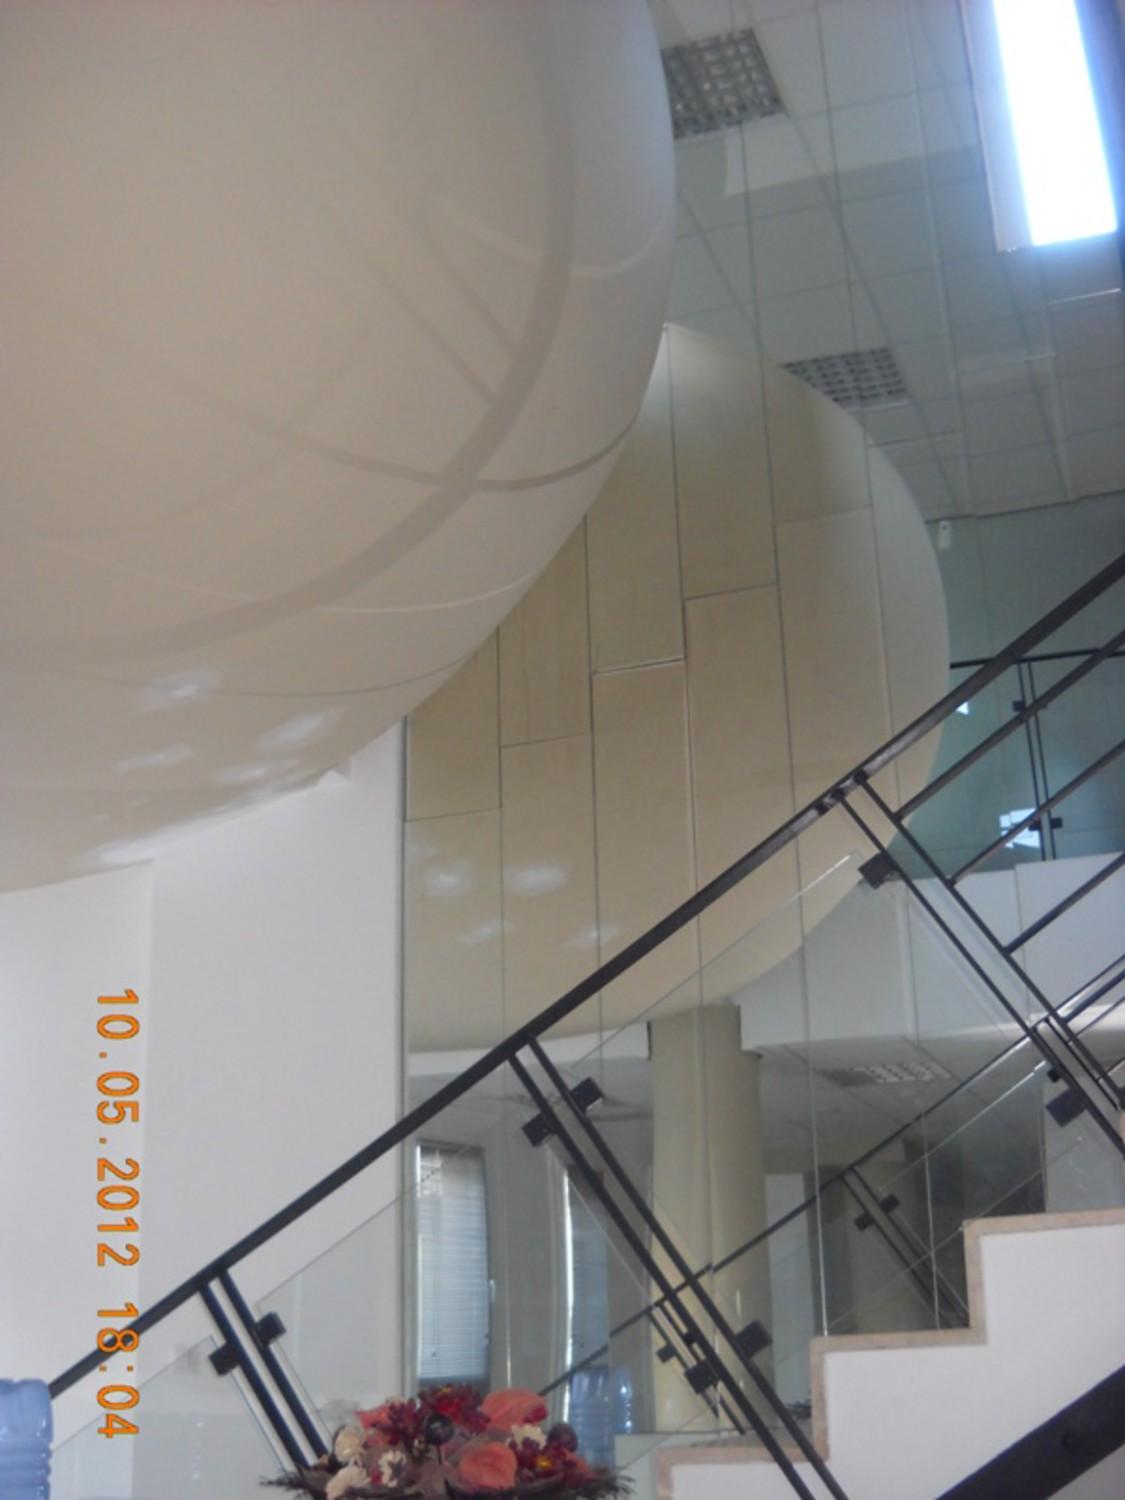 View of the egg (waiting room) with its reflection on the mirror wall